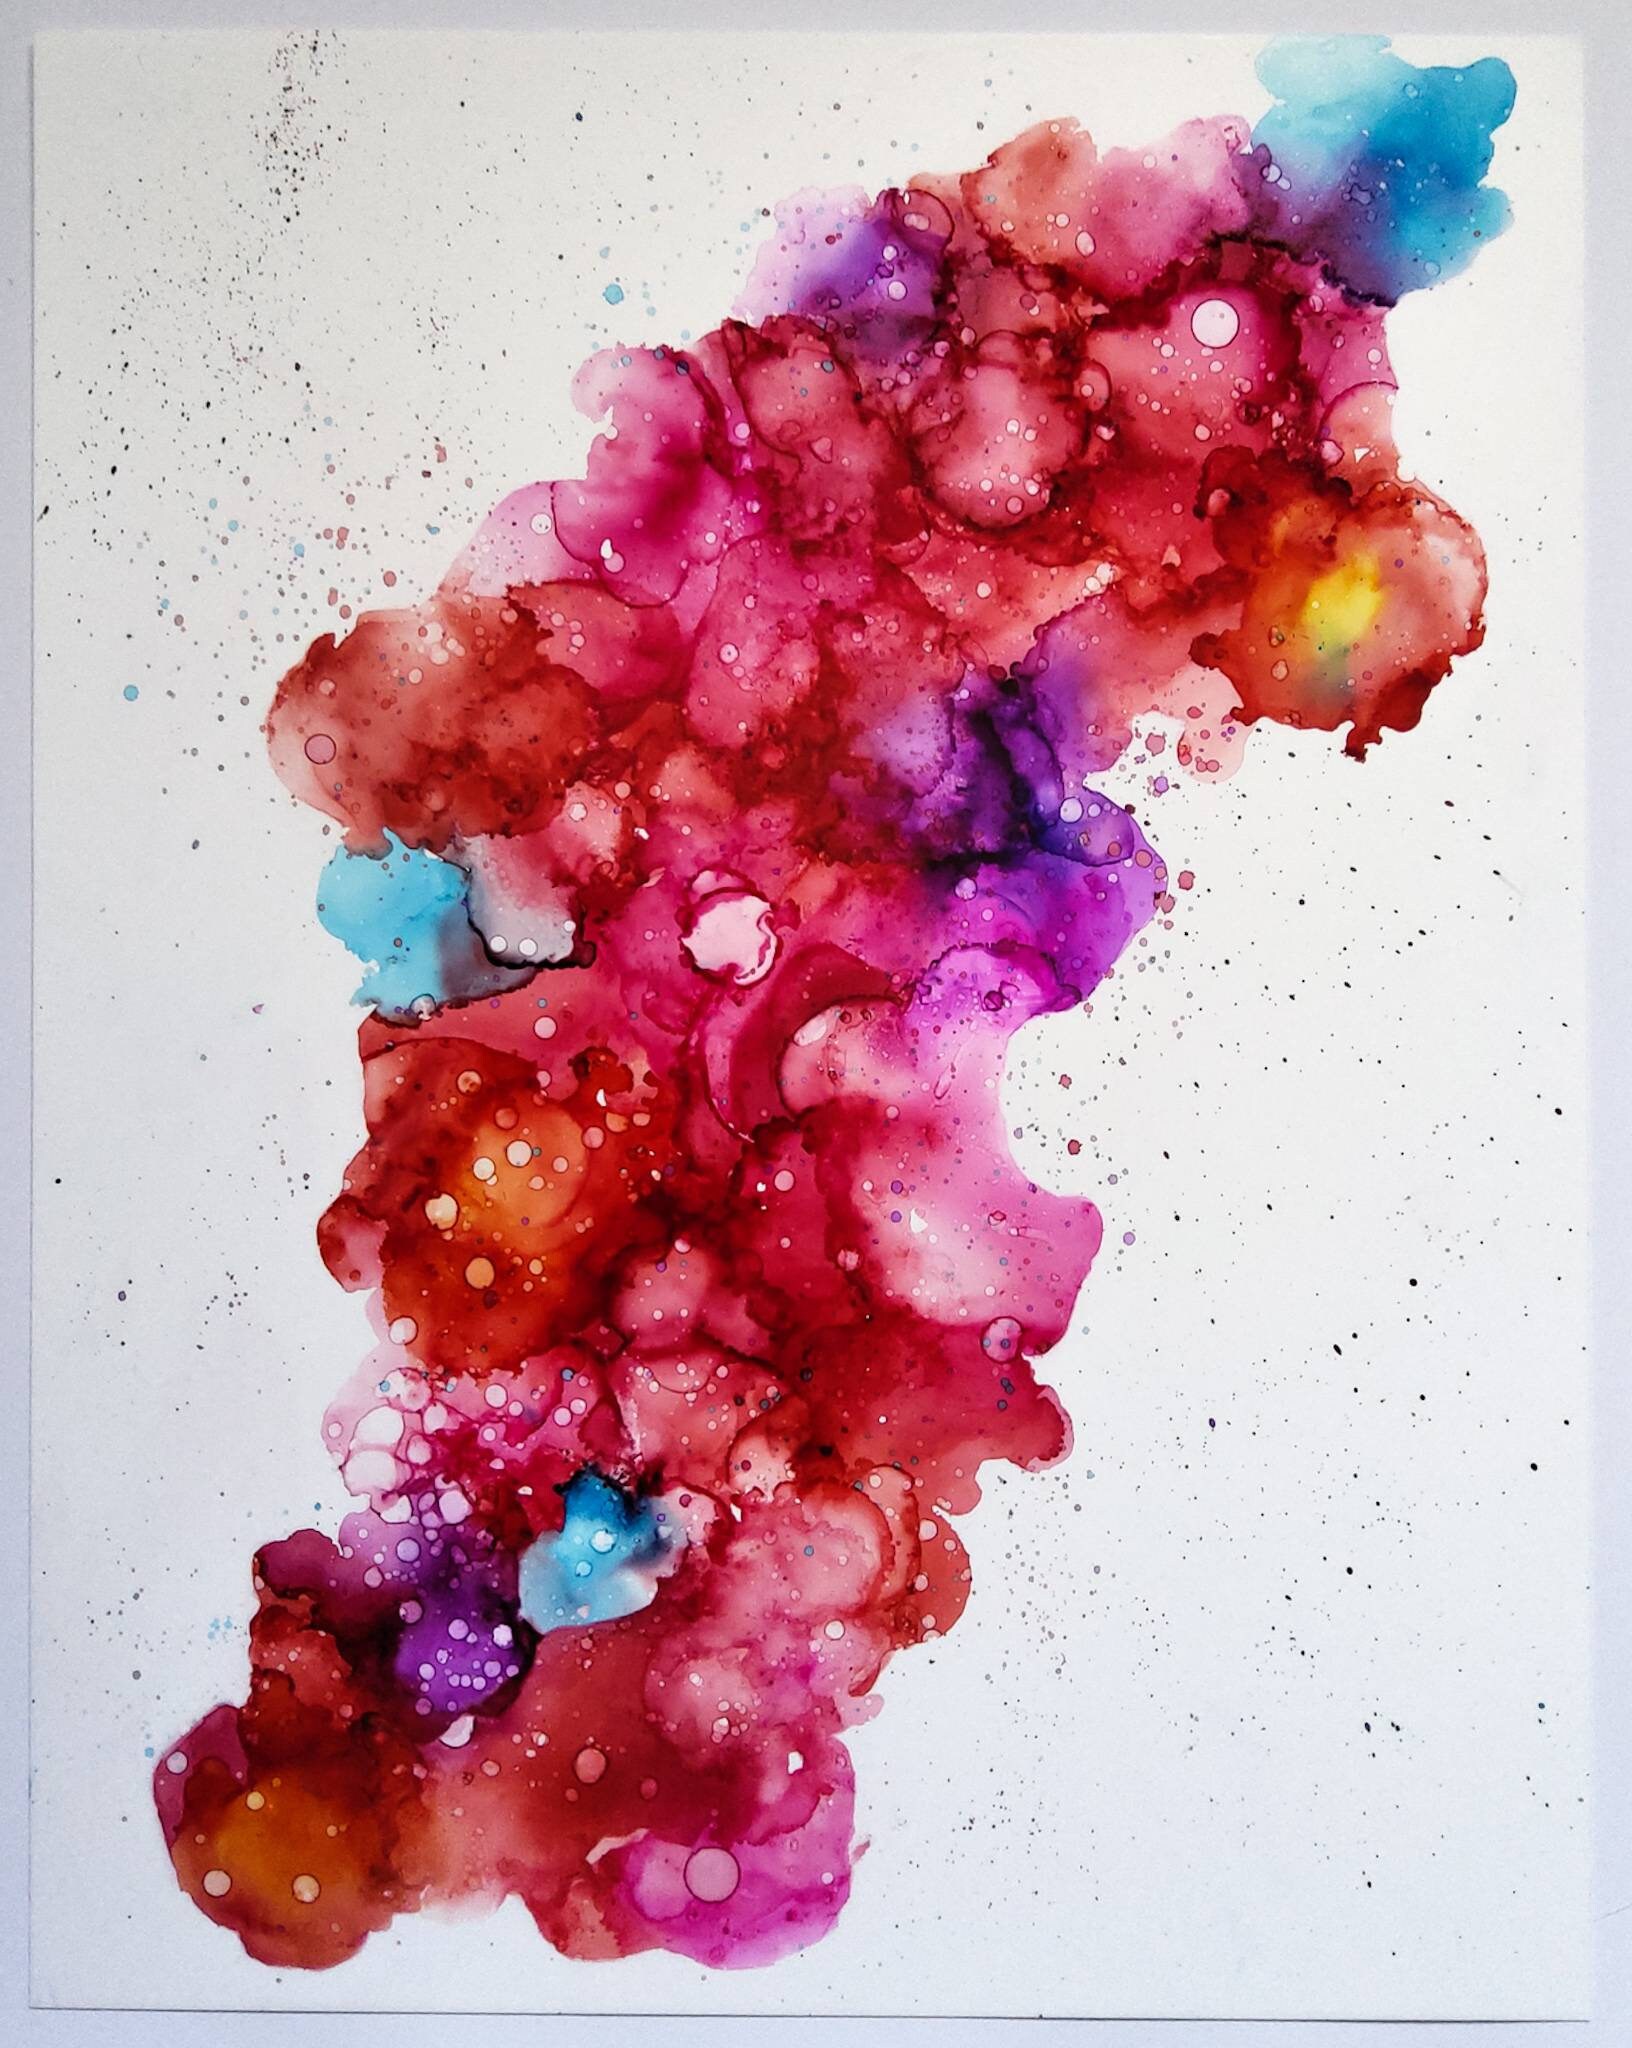 Alcohol Ink Painting, 8 x 10 Matted to 11 x 14, Purple and Blue Abstra